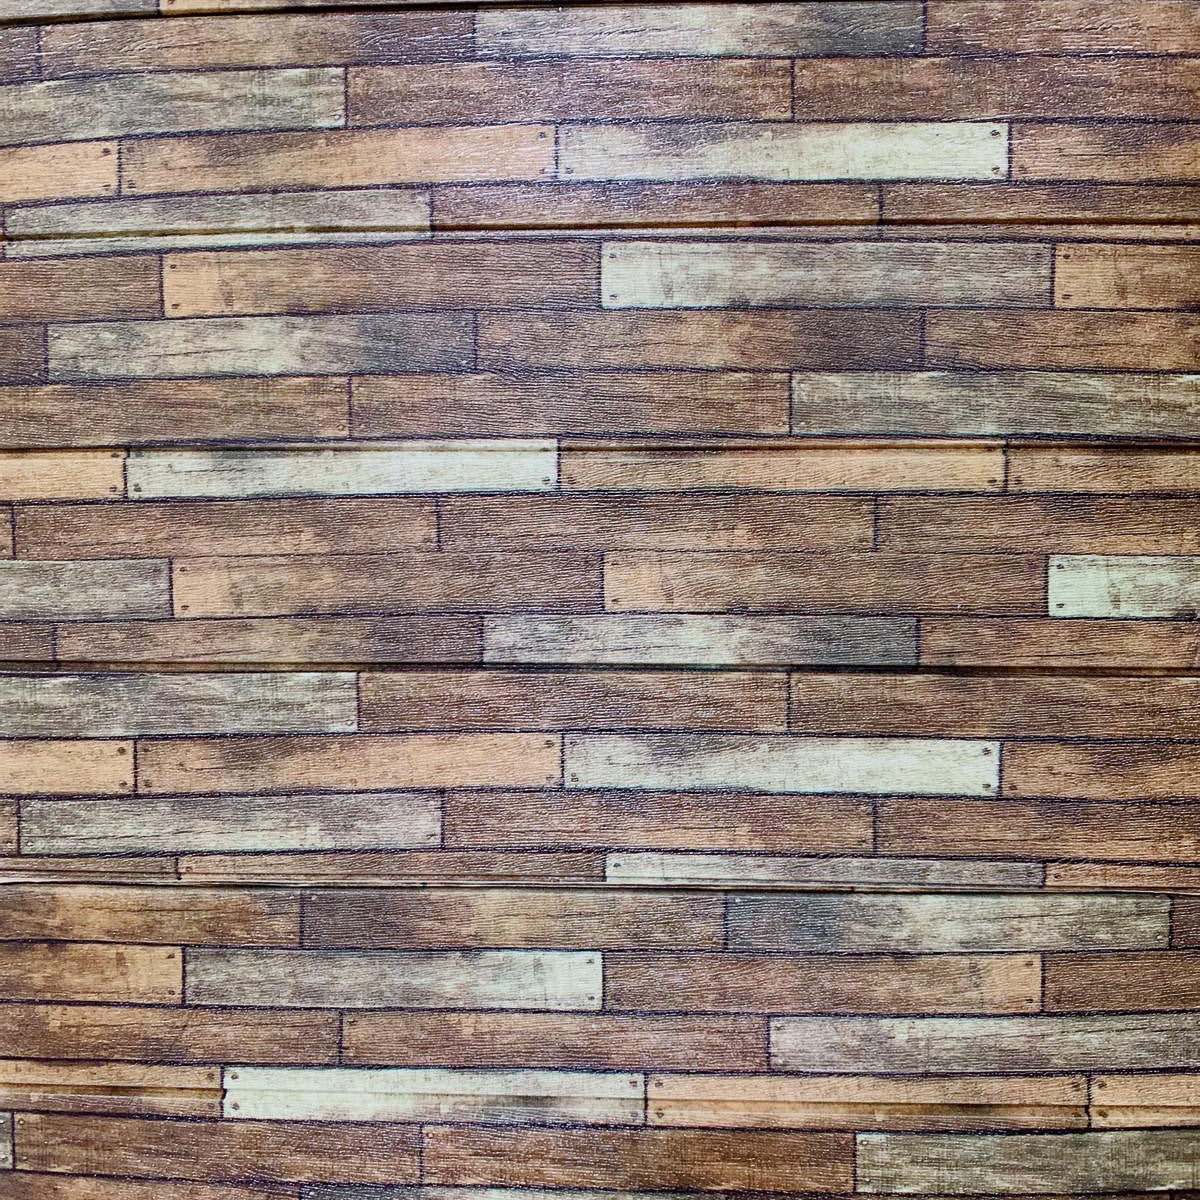 DIY Wood Wall Feature with Adhesive Rustic Dark Wood